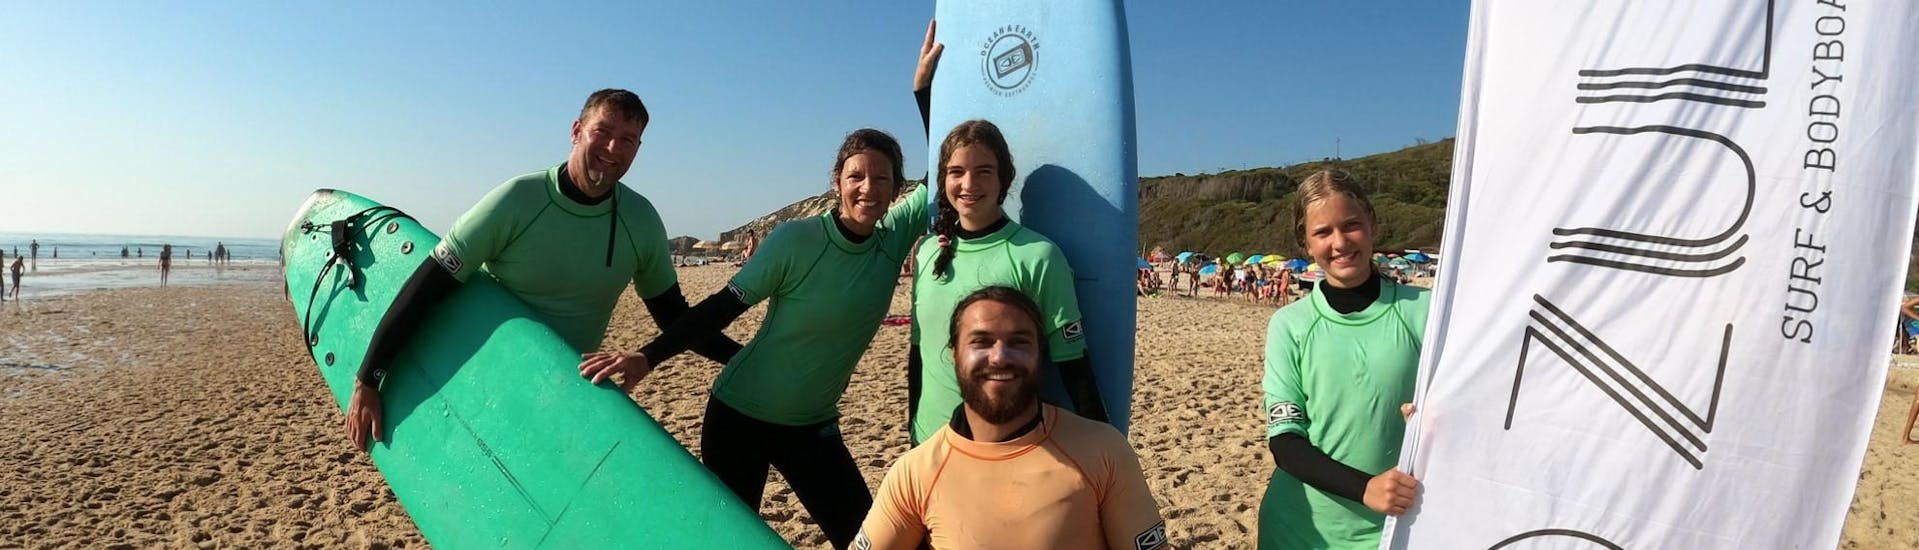 A group of people on the beach smiling and having fun during the Surf Lessons in Nazaré with Zulla Surf School Nazaré.